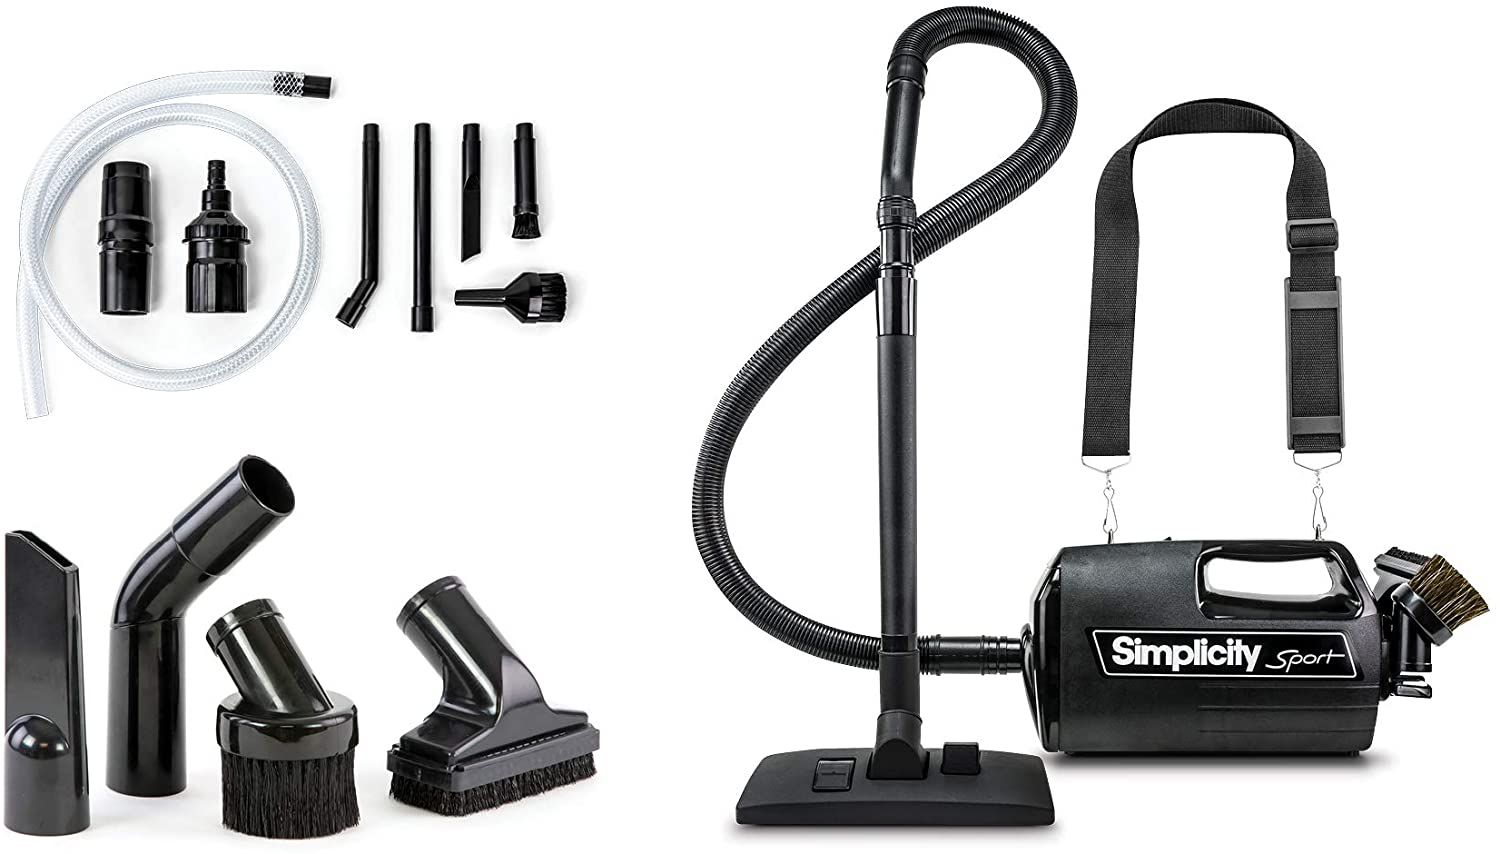 Simplicity S100 Canister and Car Vacuum Cleaner | Handheld | Charcoal Filter | Crevice Tool and More